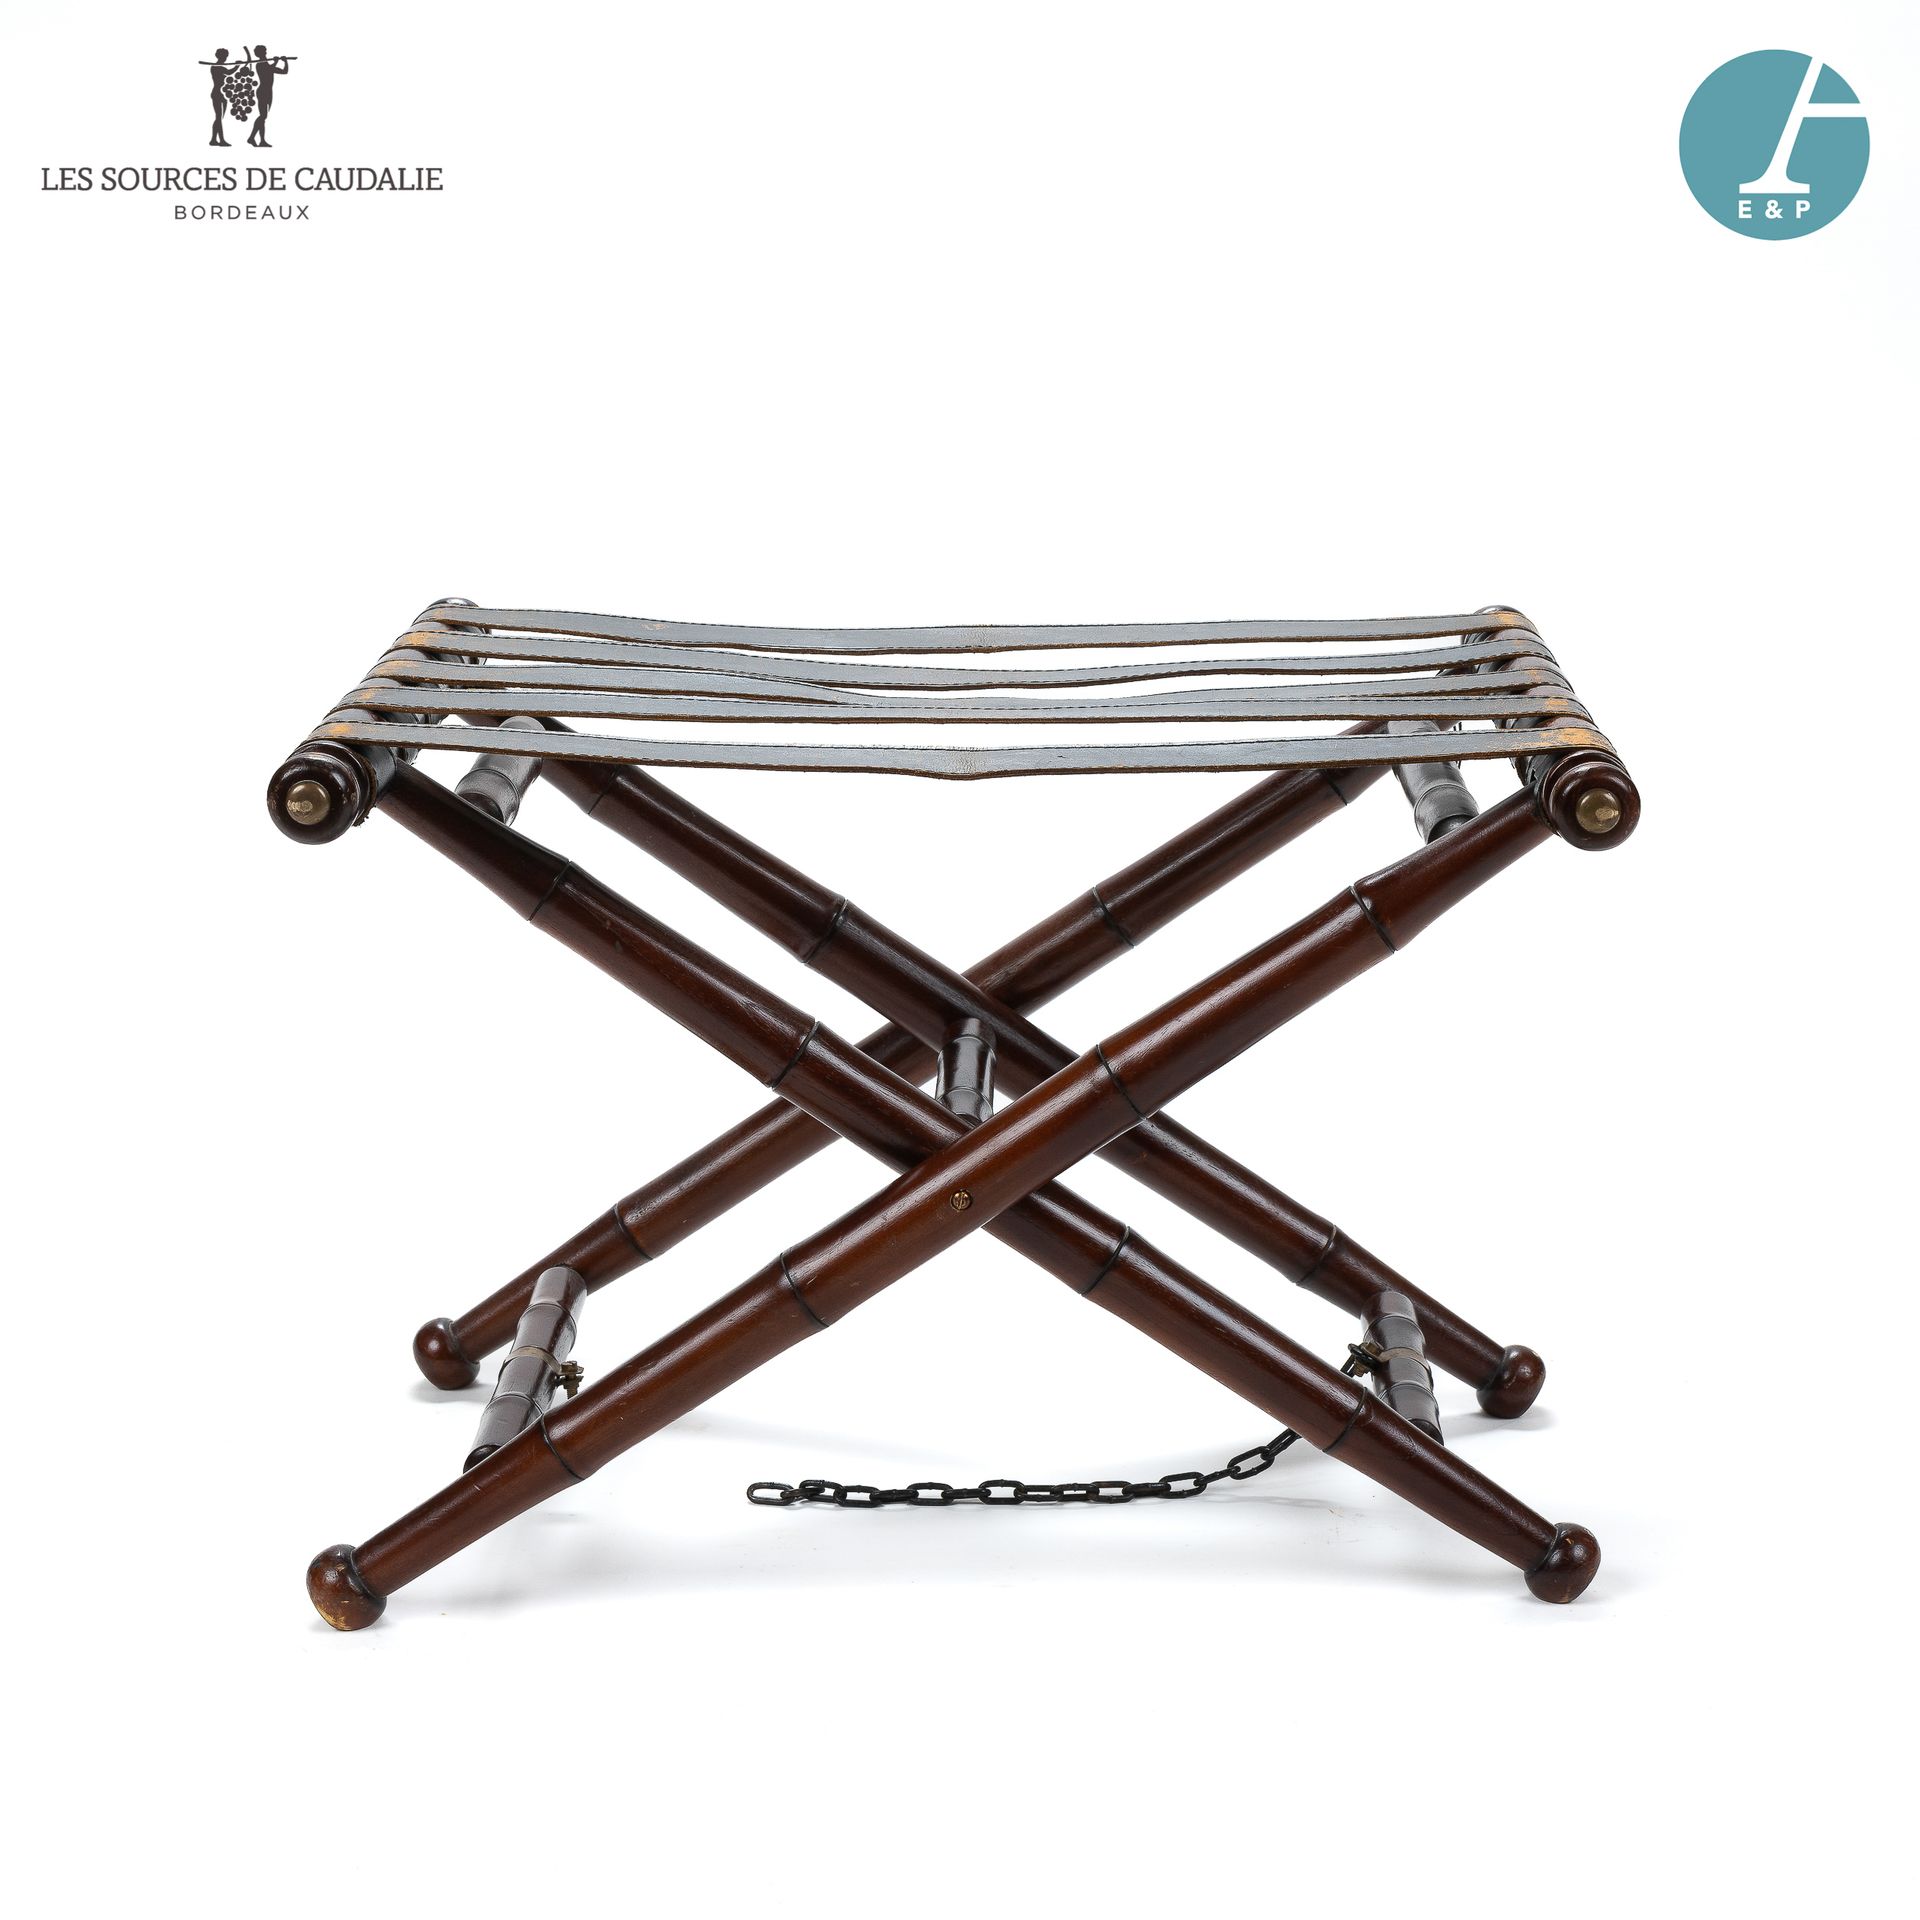 Null From Room #5 "Le Tonnelier

Folding luggage rack in mahogany stained wood, &hellip;